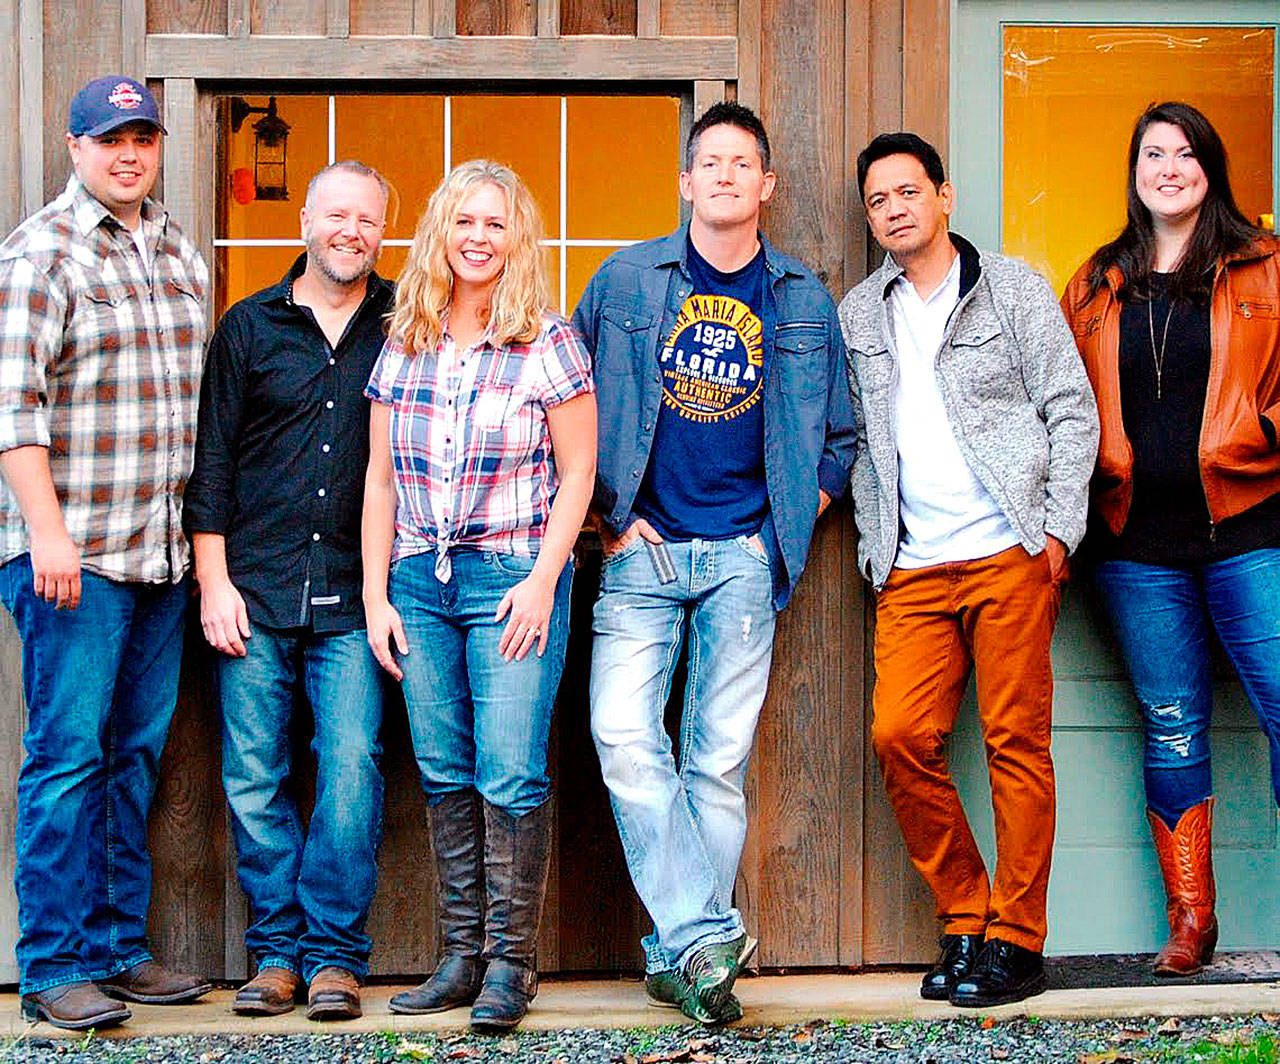 Harvey Creek Band will play some great-for-dancing music at Loco Billy’s Wild Moon Saloon on New Year’s Eve. (Harvey Creek Band)